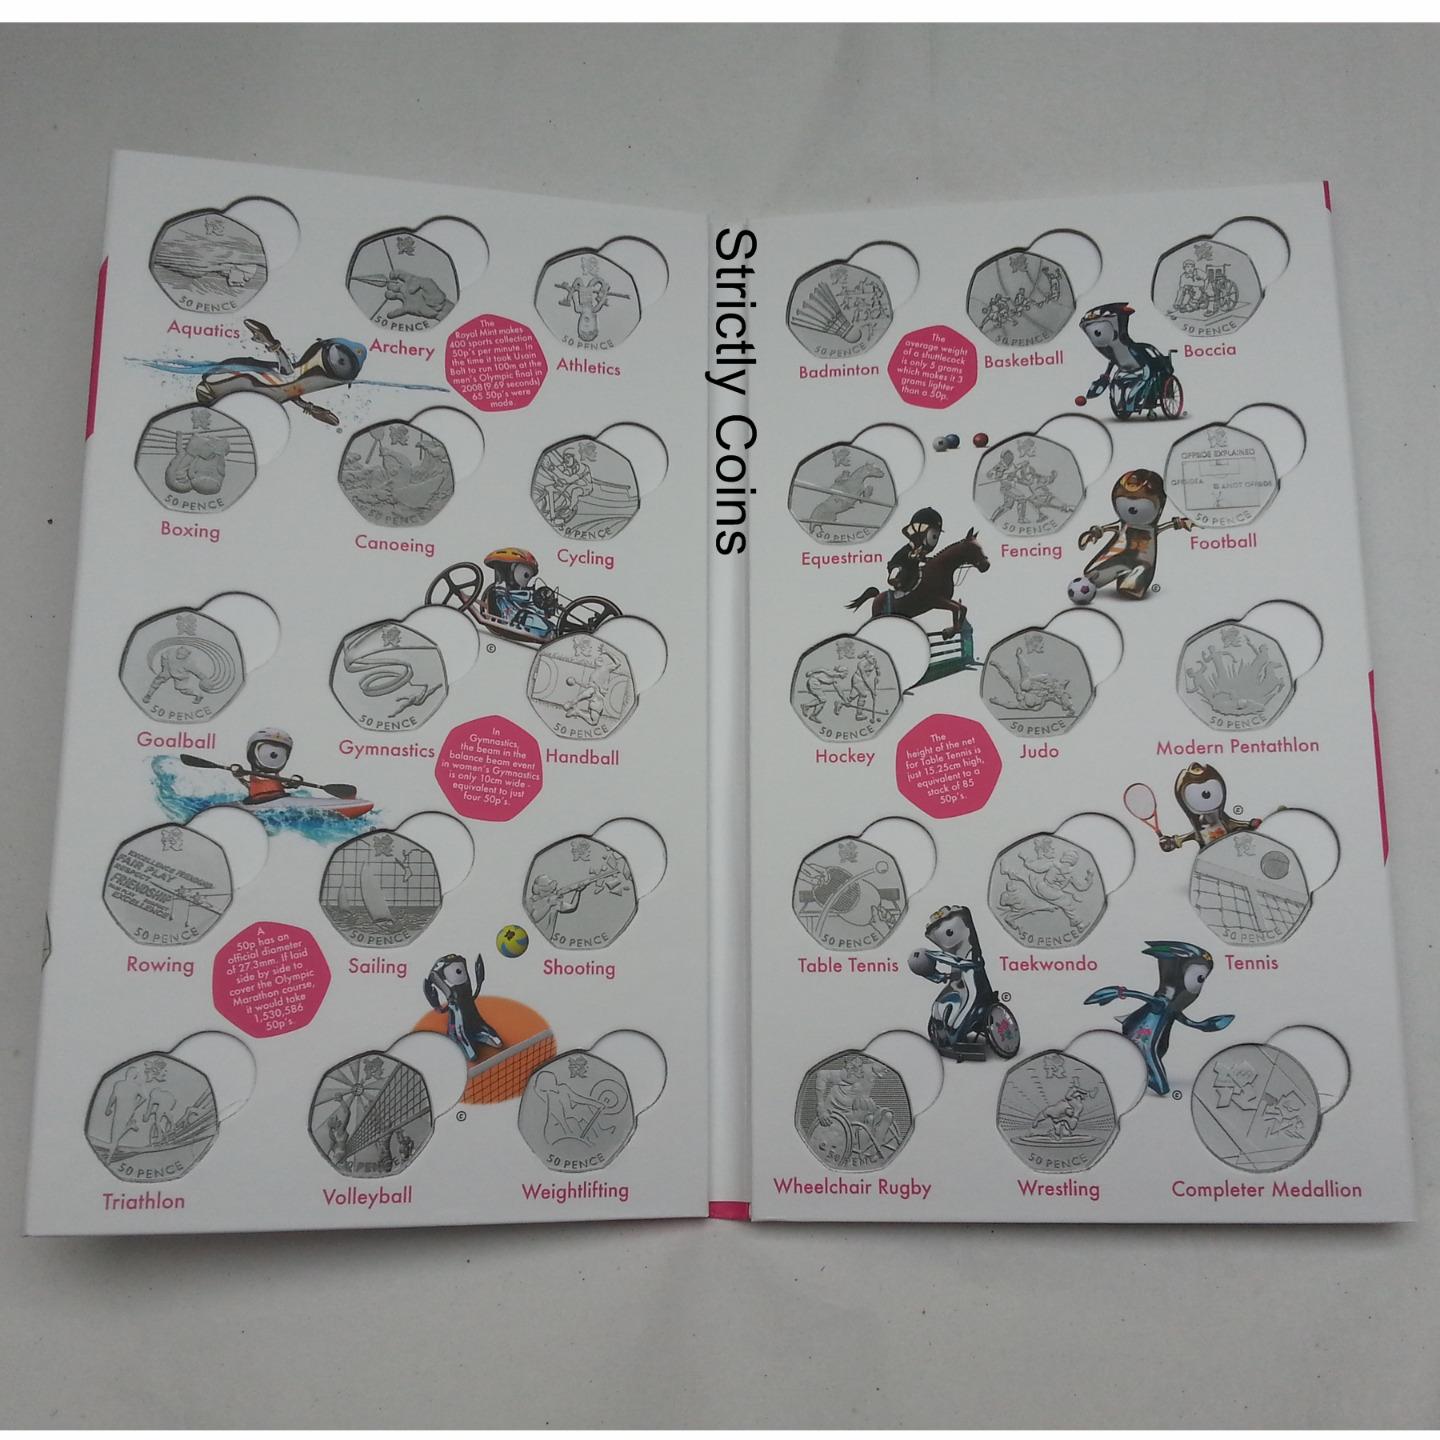 Complete Medallion FULL Official London 2012 Olympic 50p Coin Collection Album 